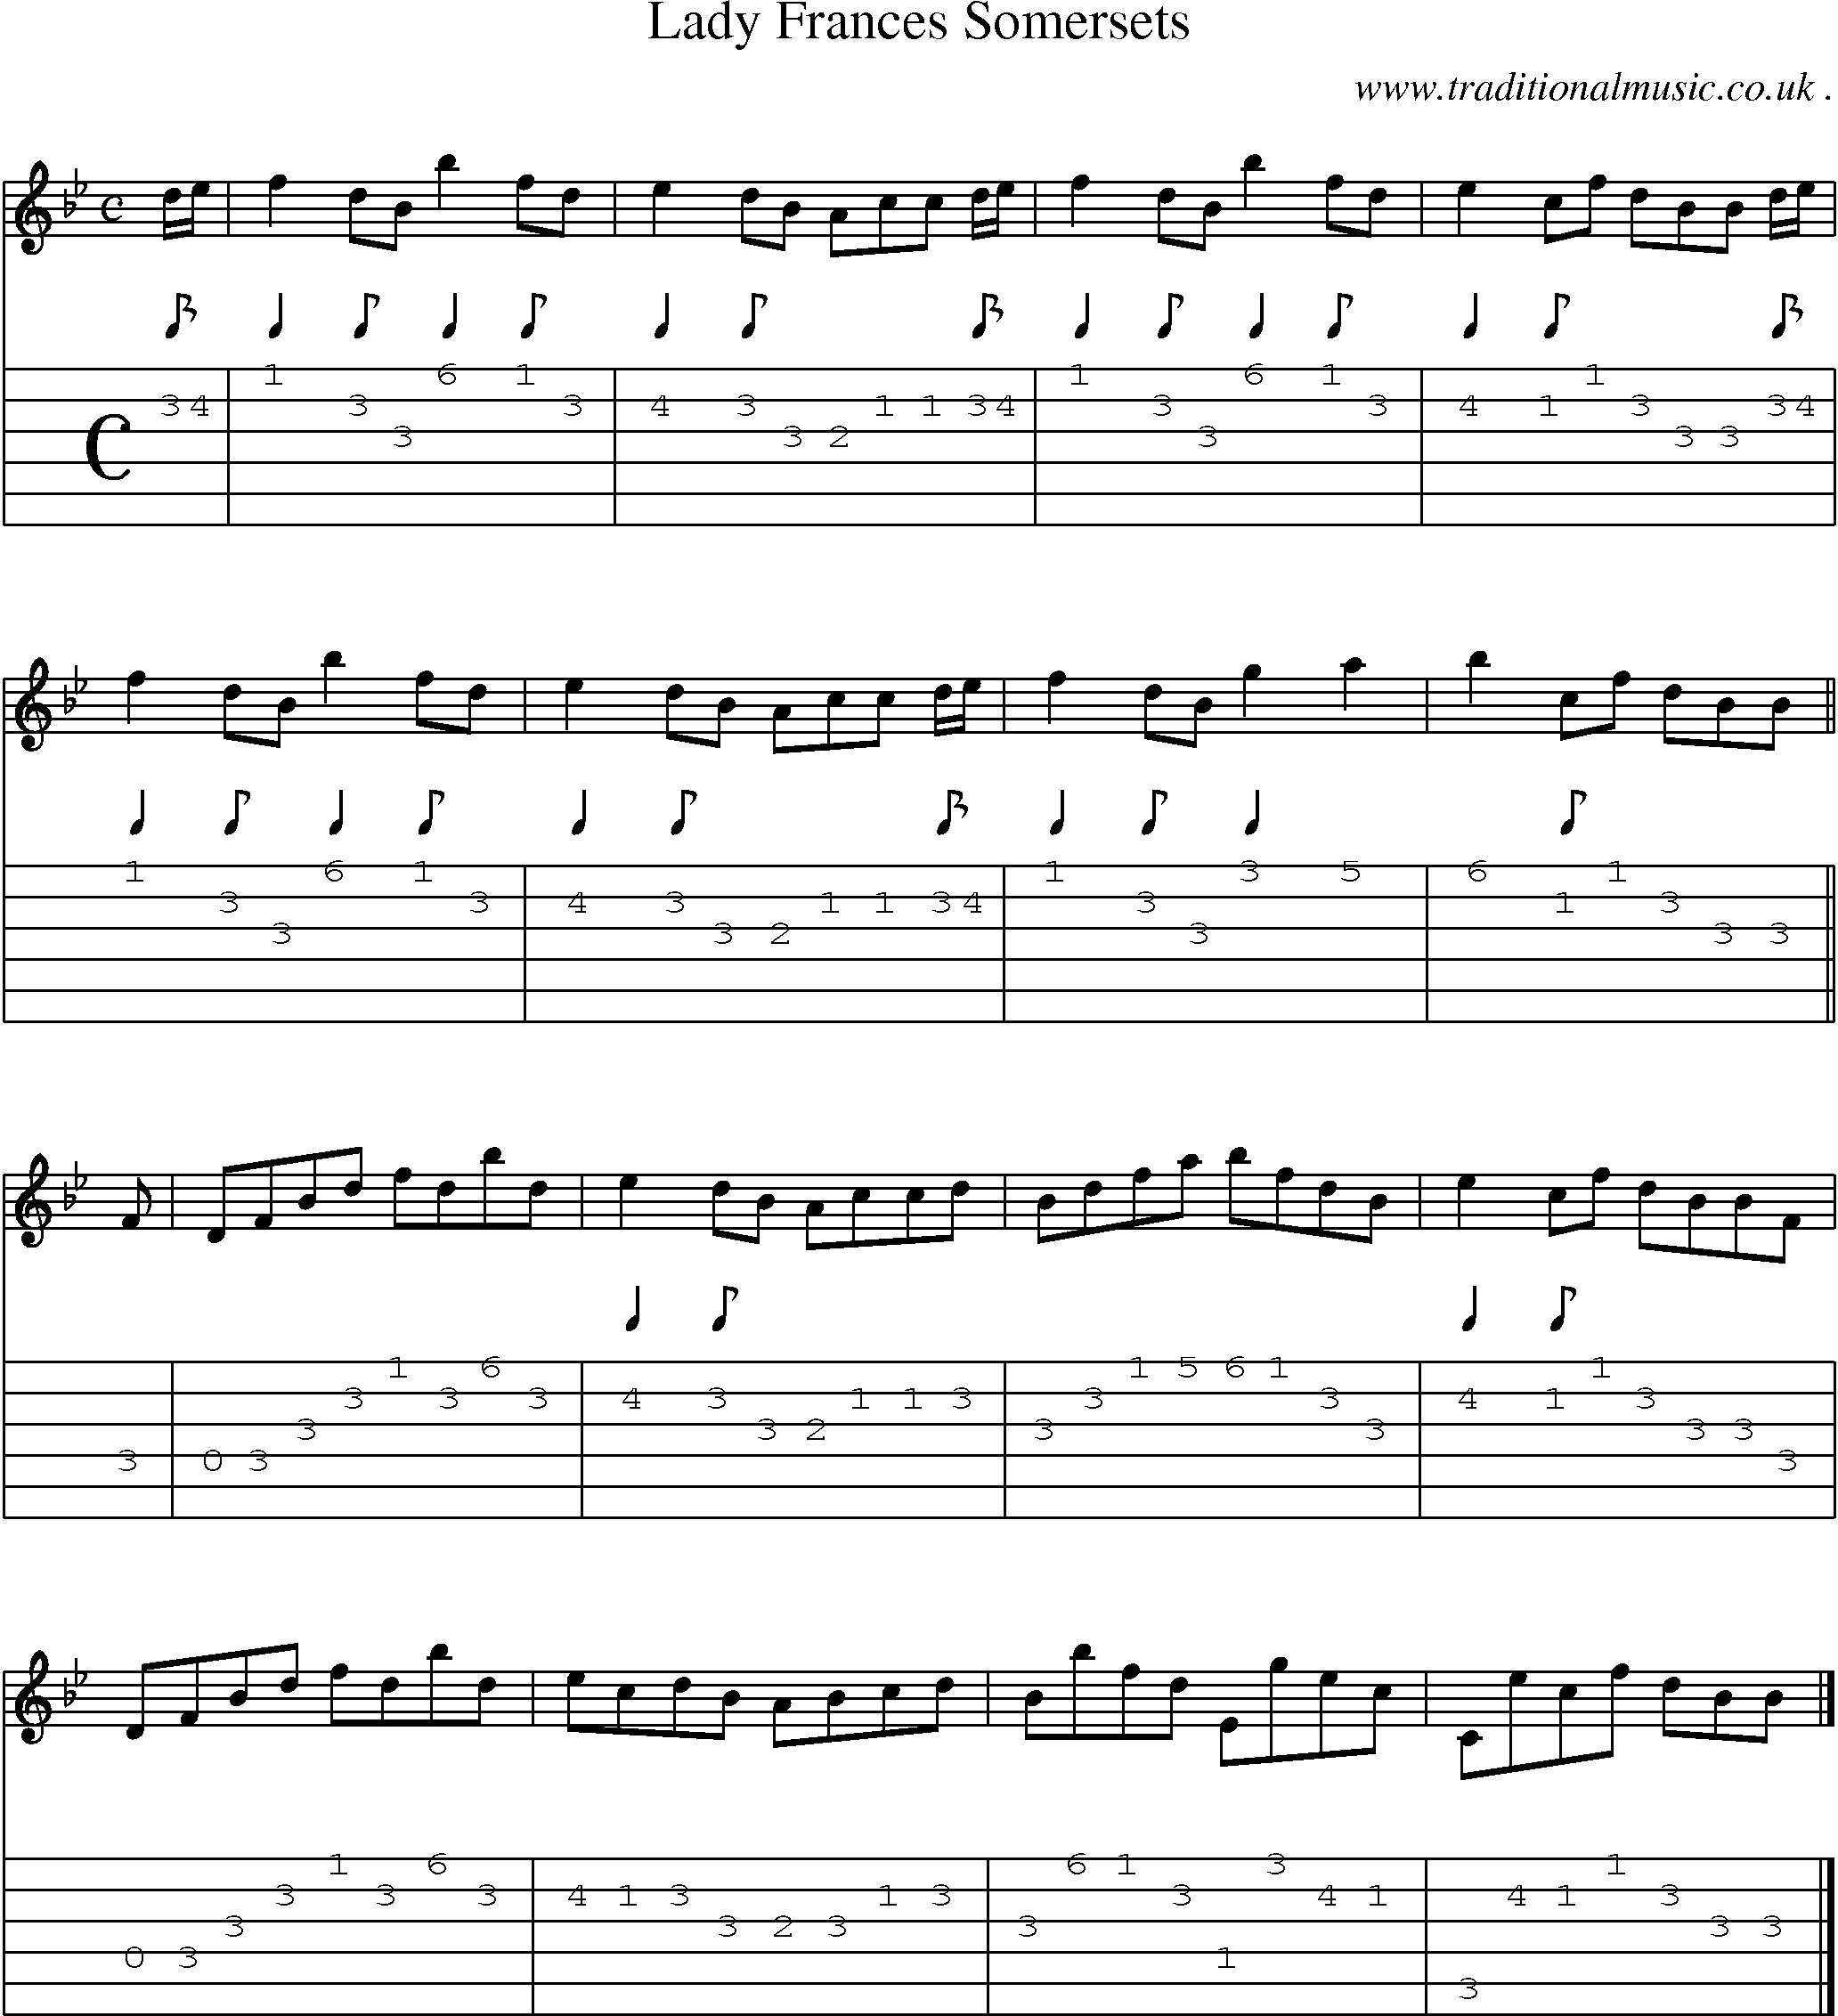 Sheet-music  score, Chords and Guitar Tabs for Lady Frances Somersets